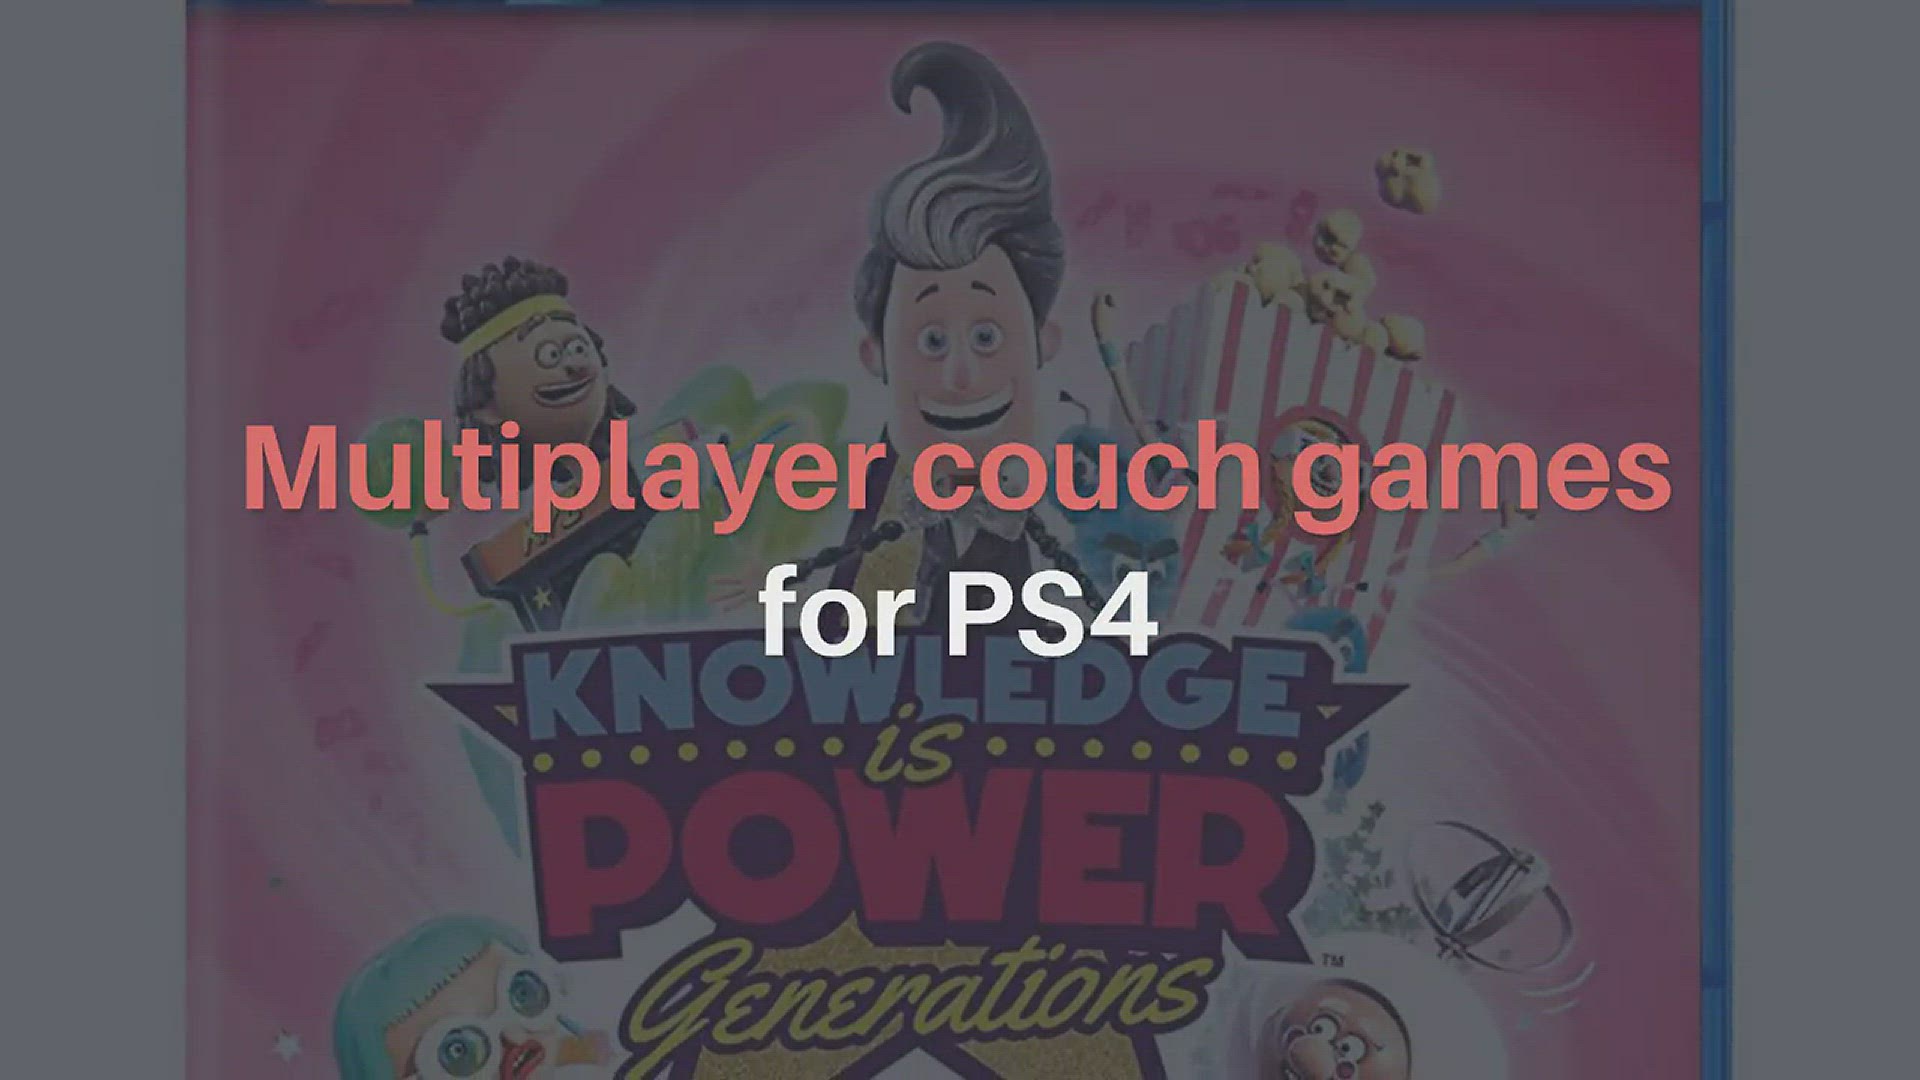 'Video thumbnail for Multiplayer couch games for PS4'